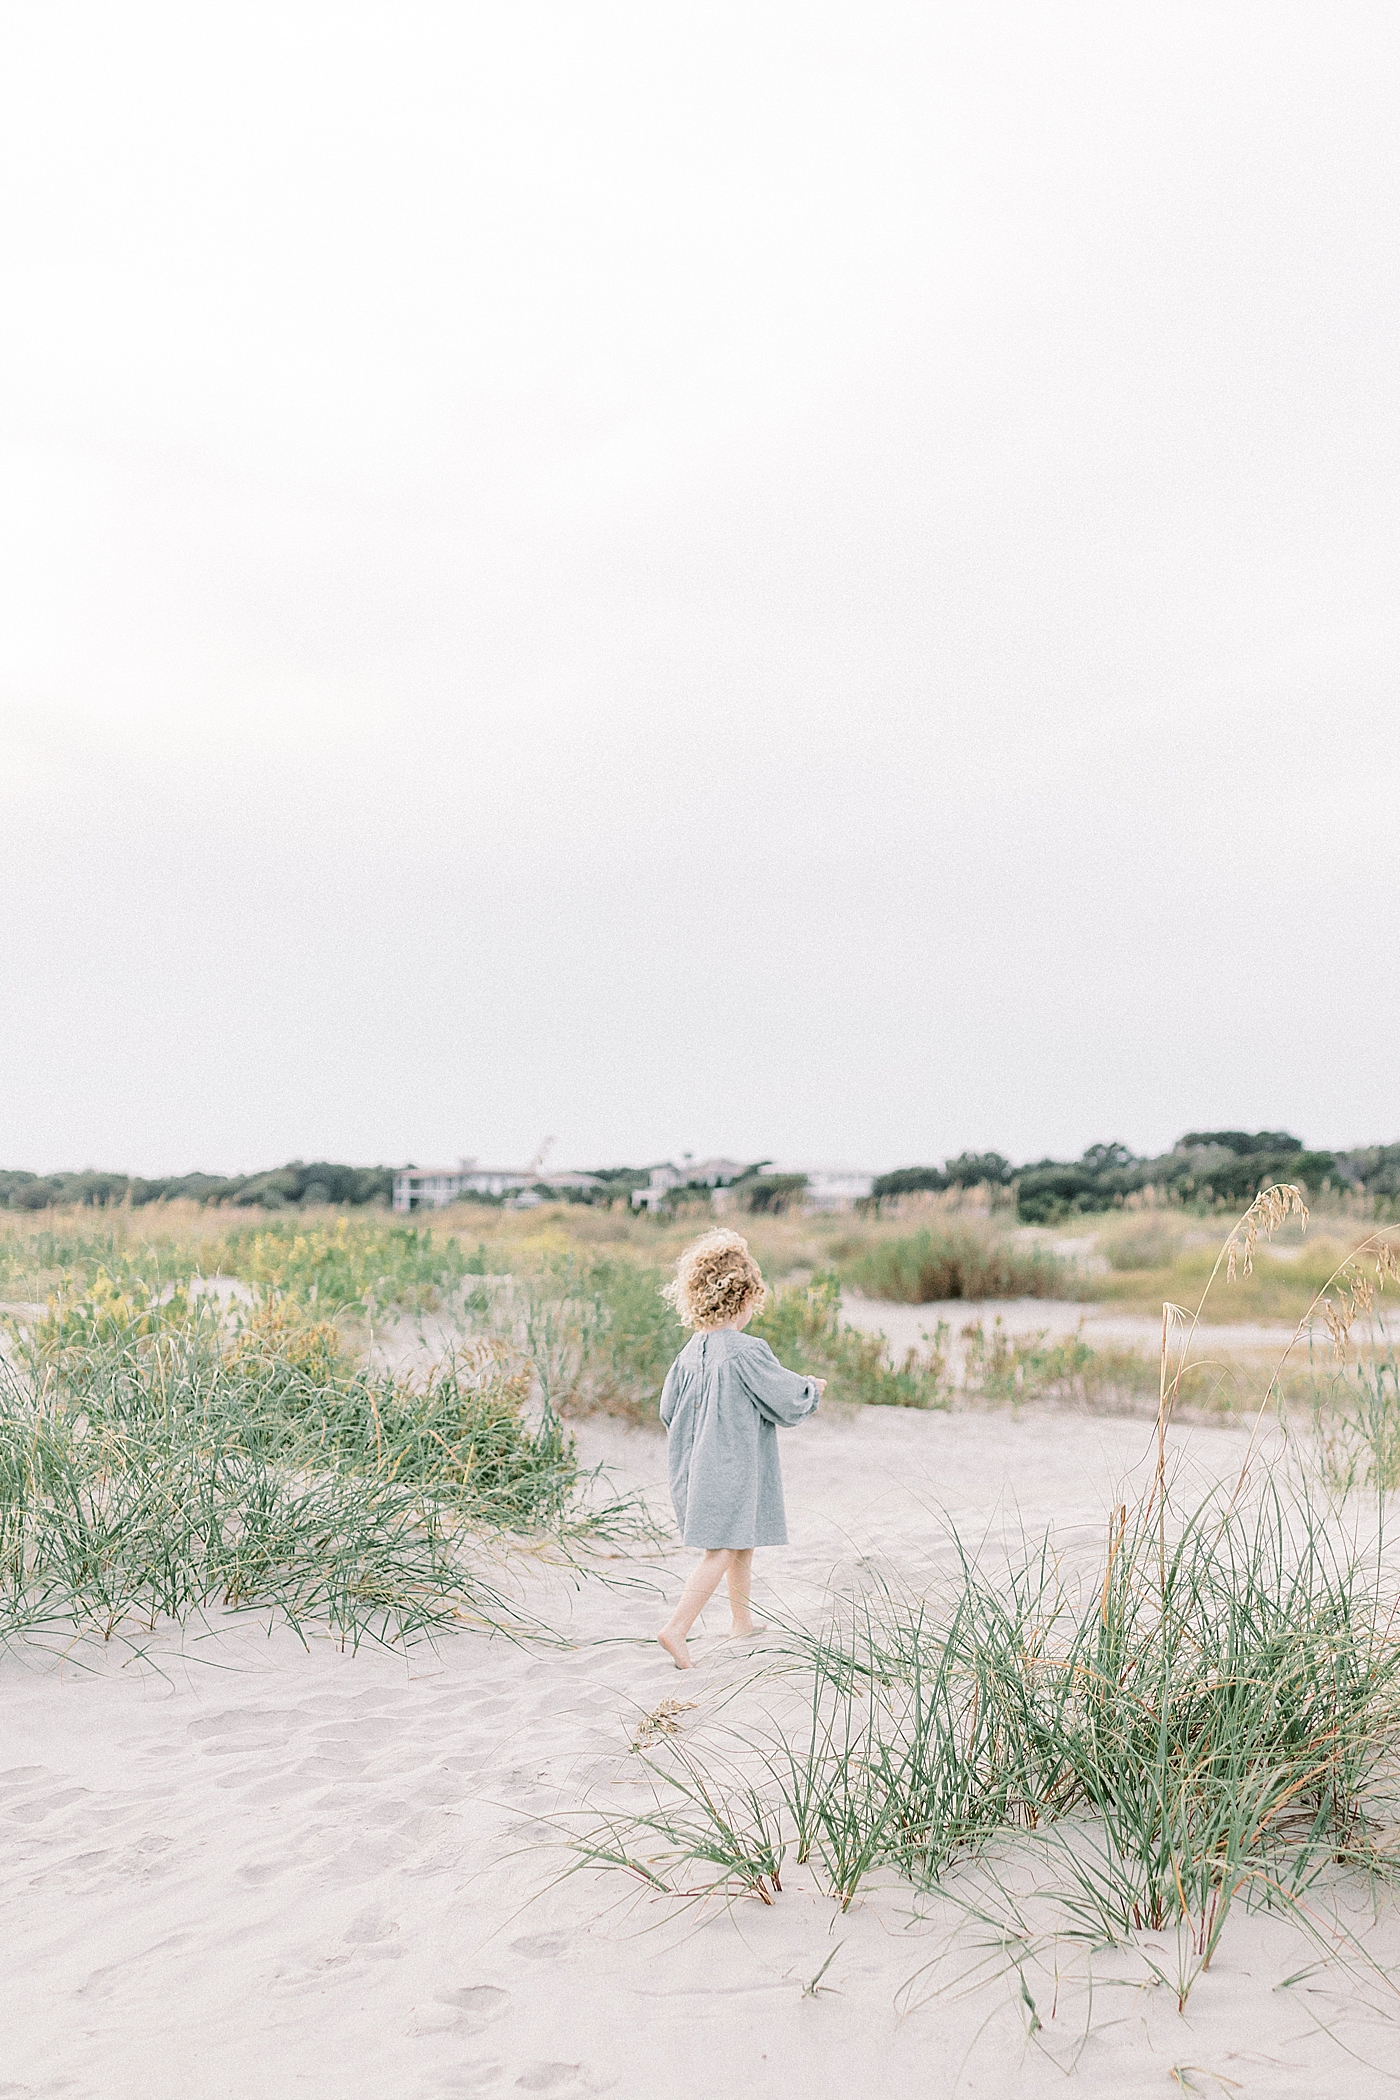 Little girl in blue dress walking on the beach near sand dunes | Photo by Caitlyn Motycka Photography